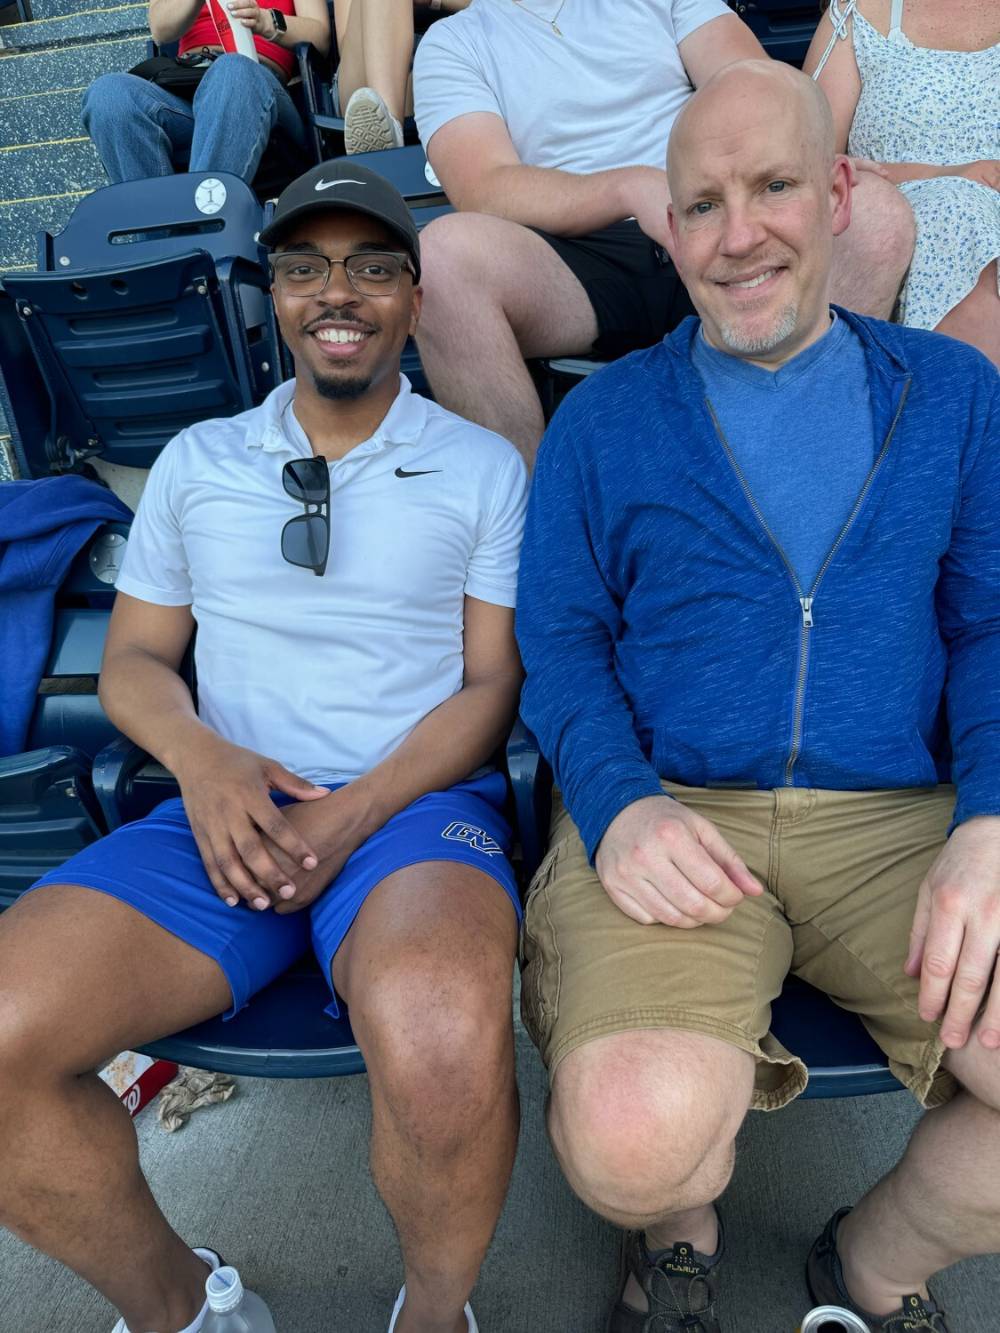 Two DC alumni at the game.